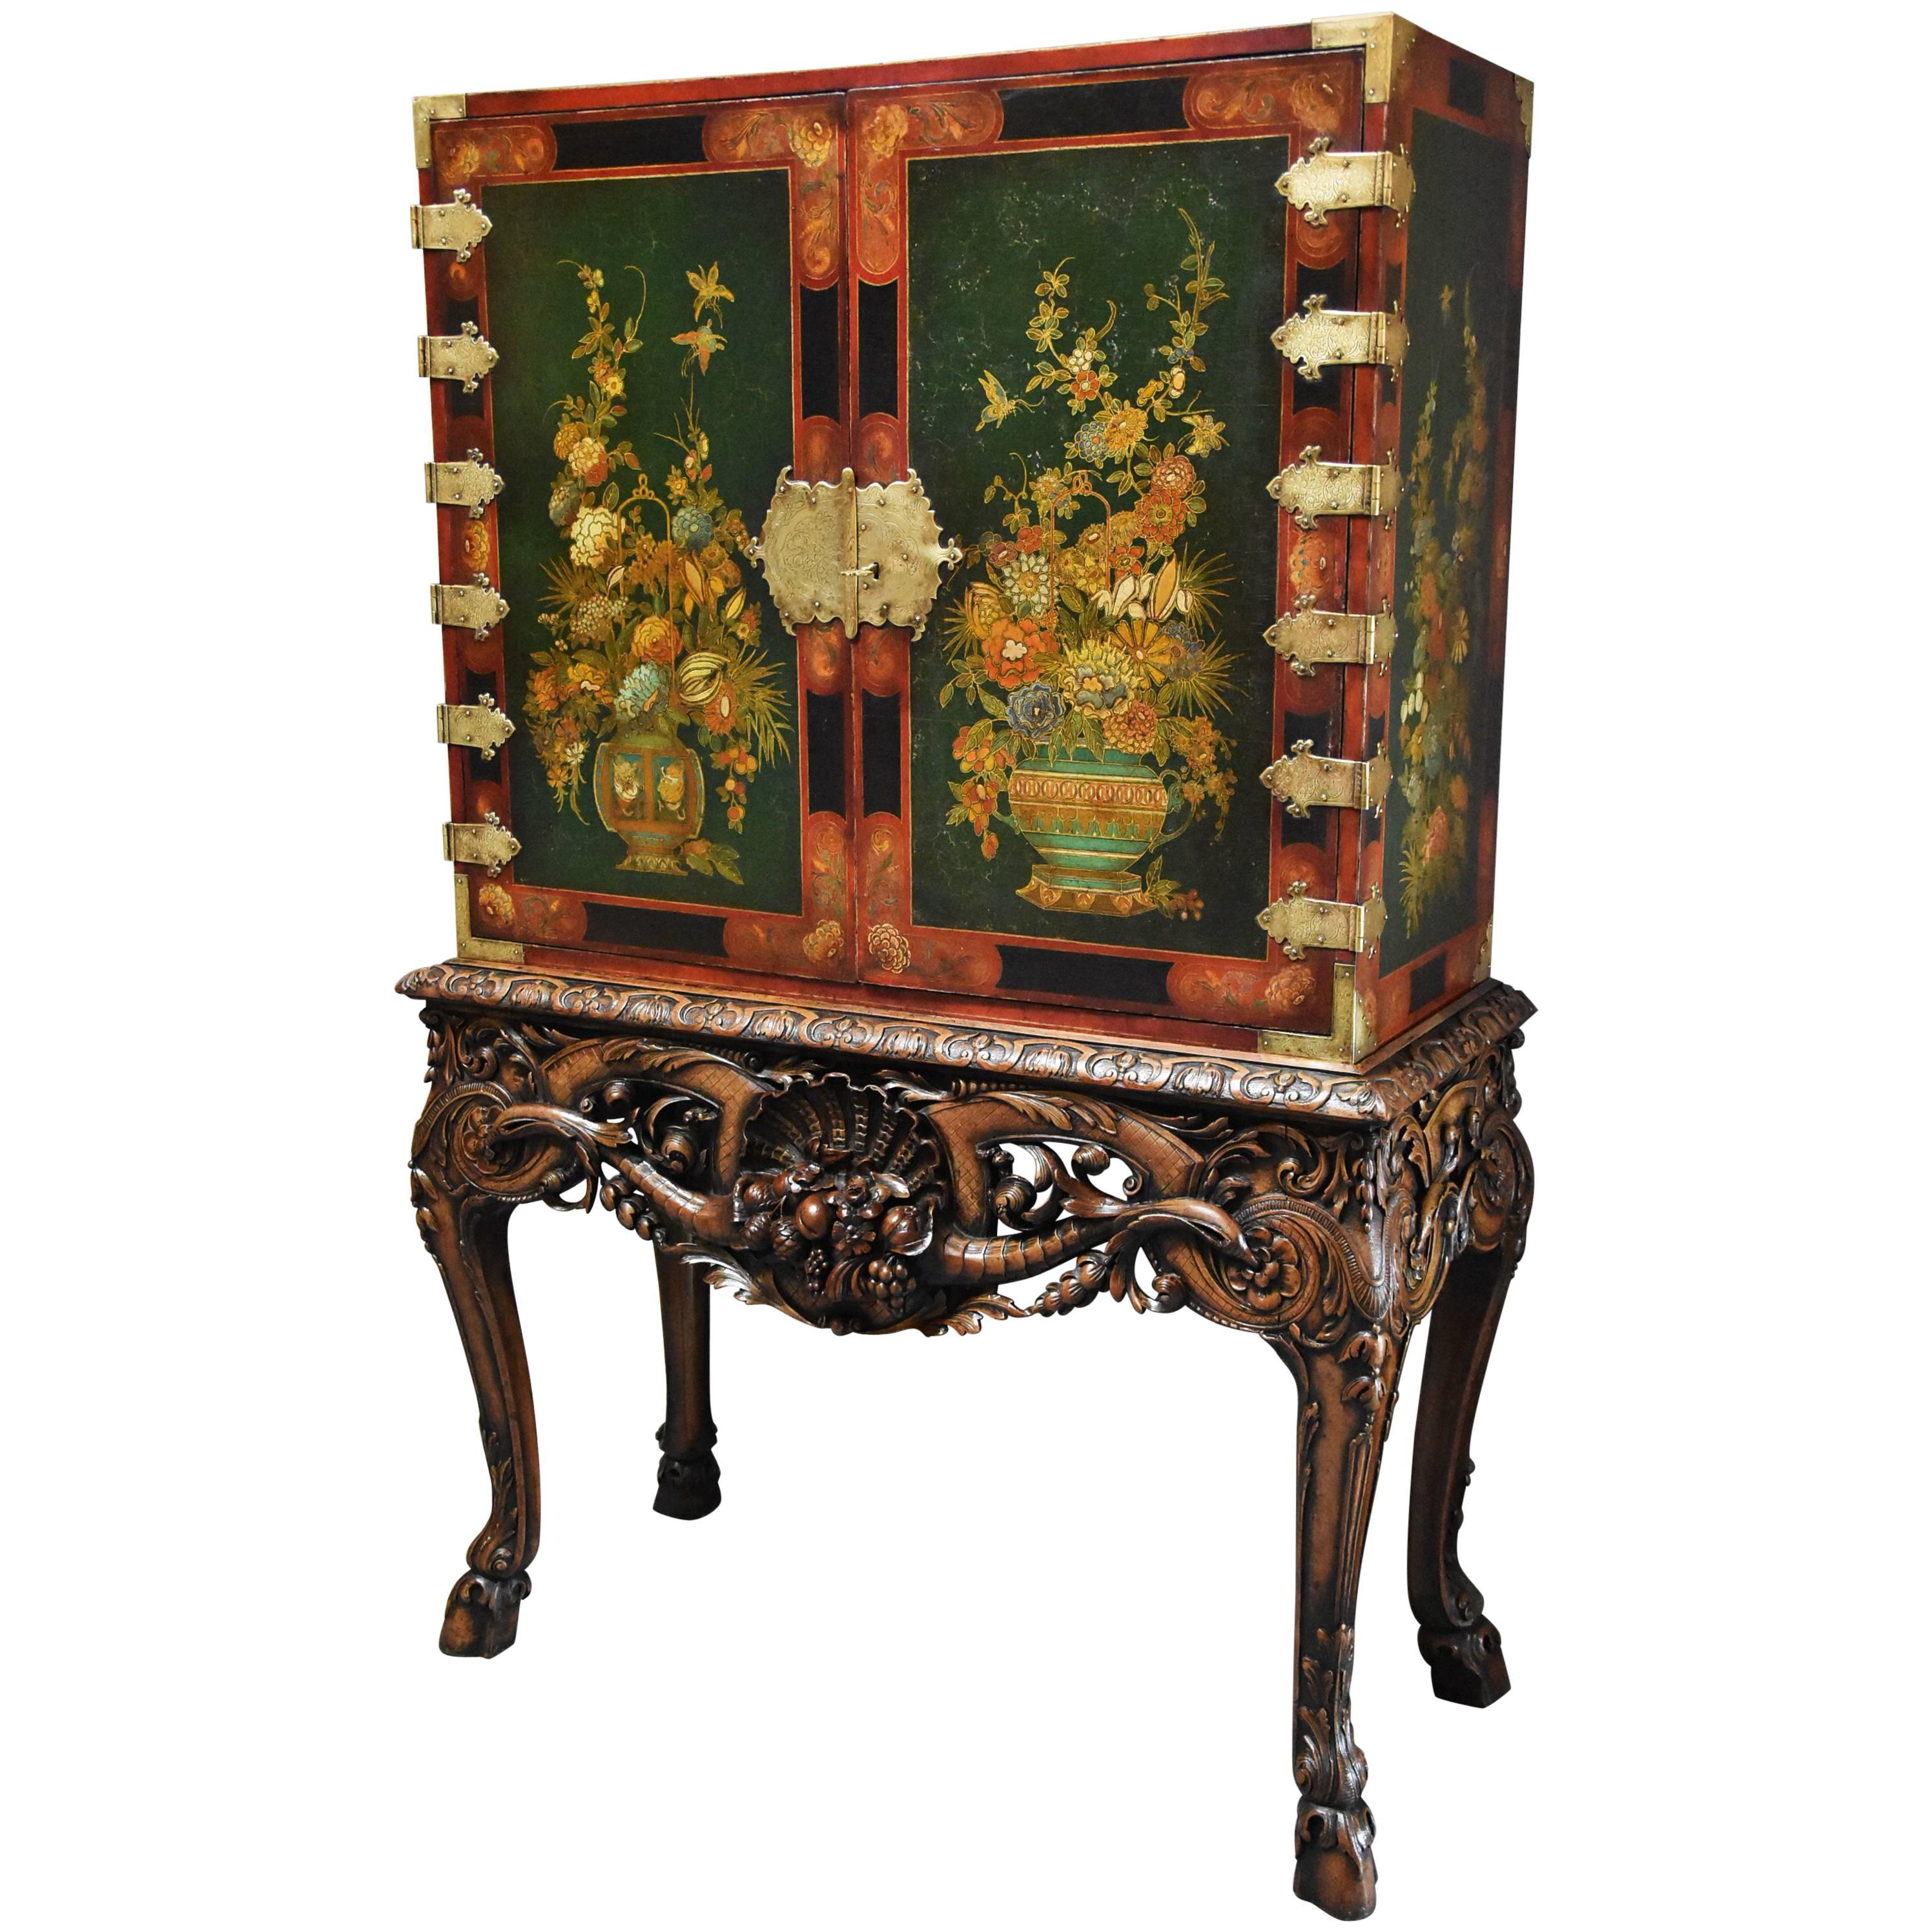 Superb Quality English Early 20th Century George II Lacquered Cabinet on Stand